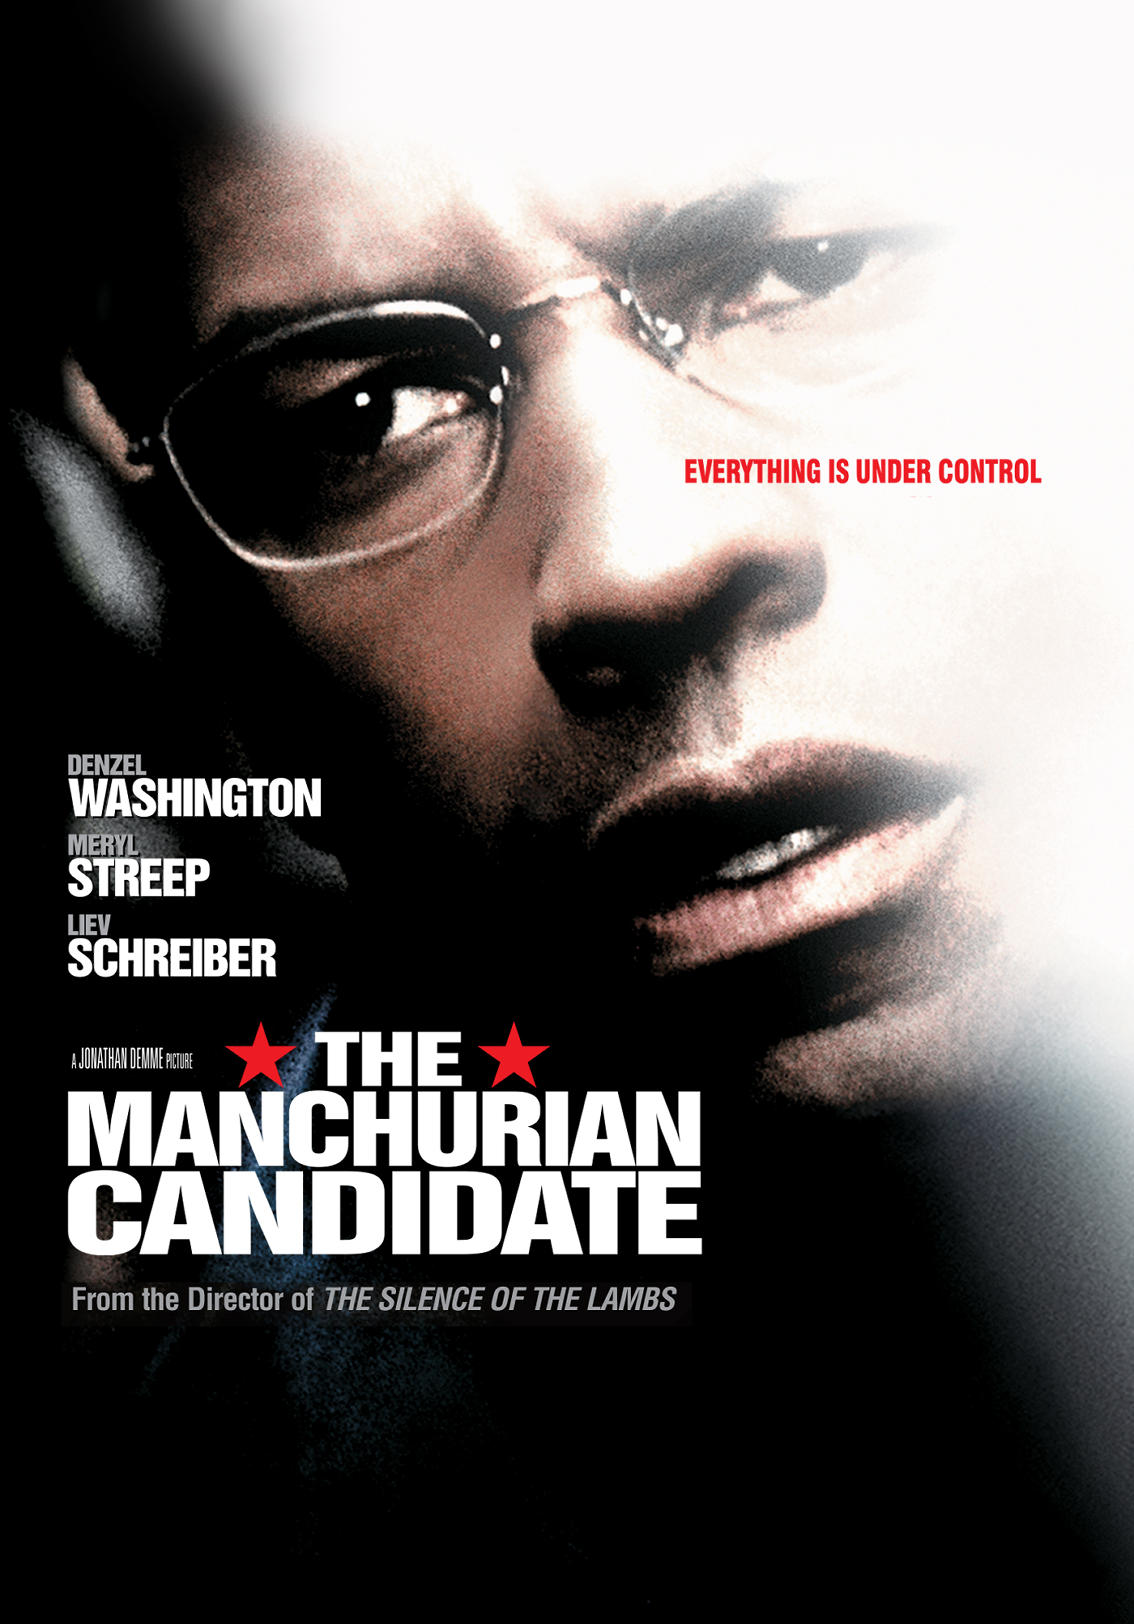 the manchurian candidate cast